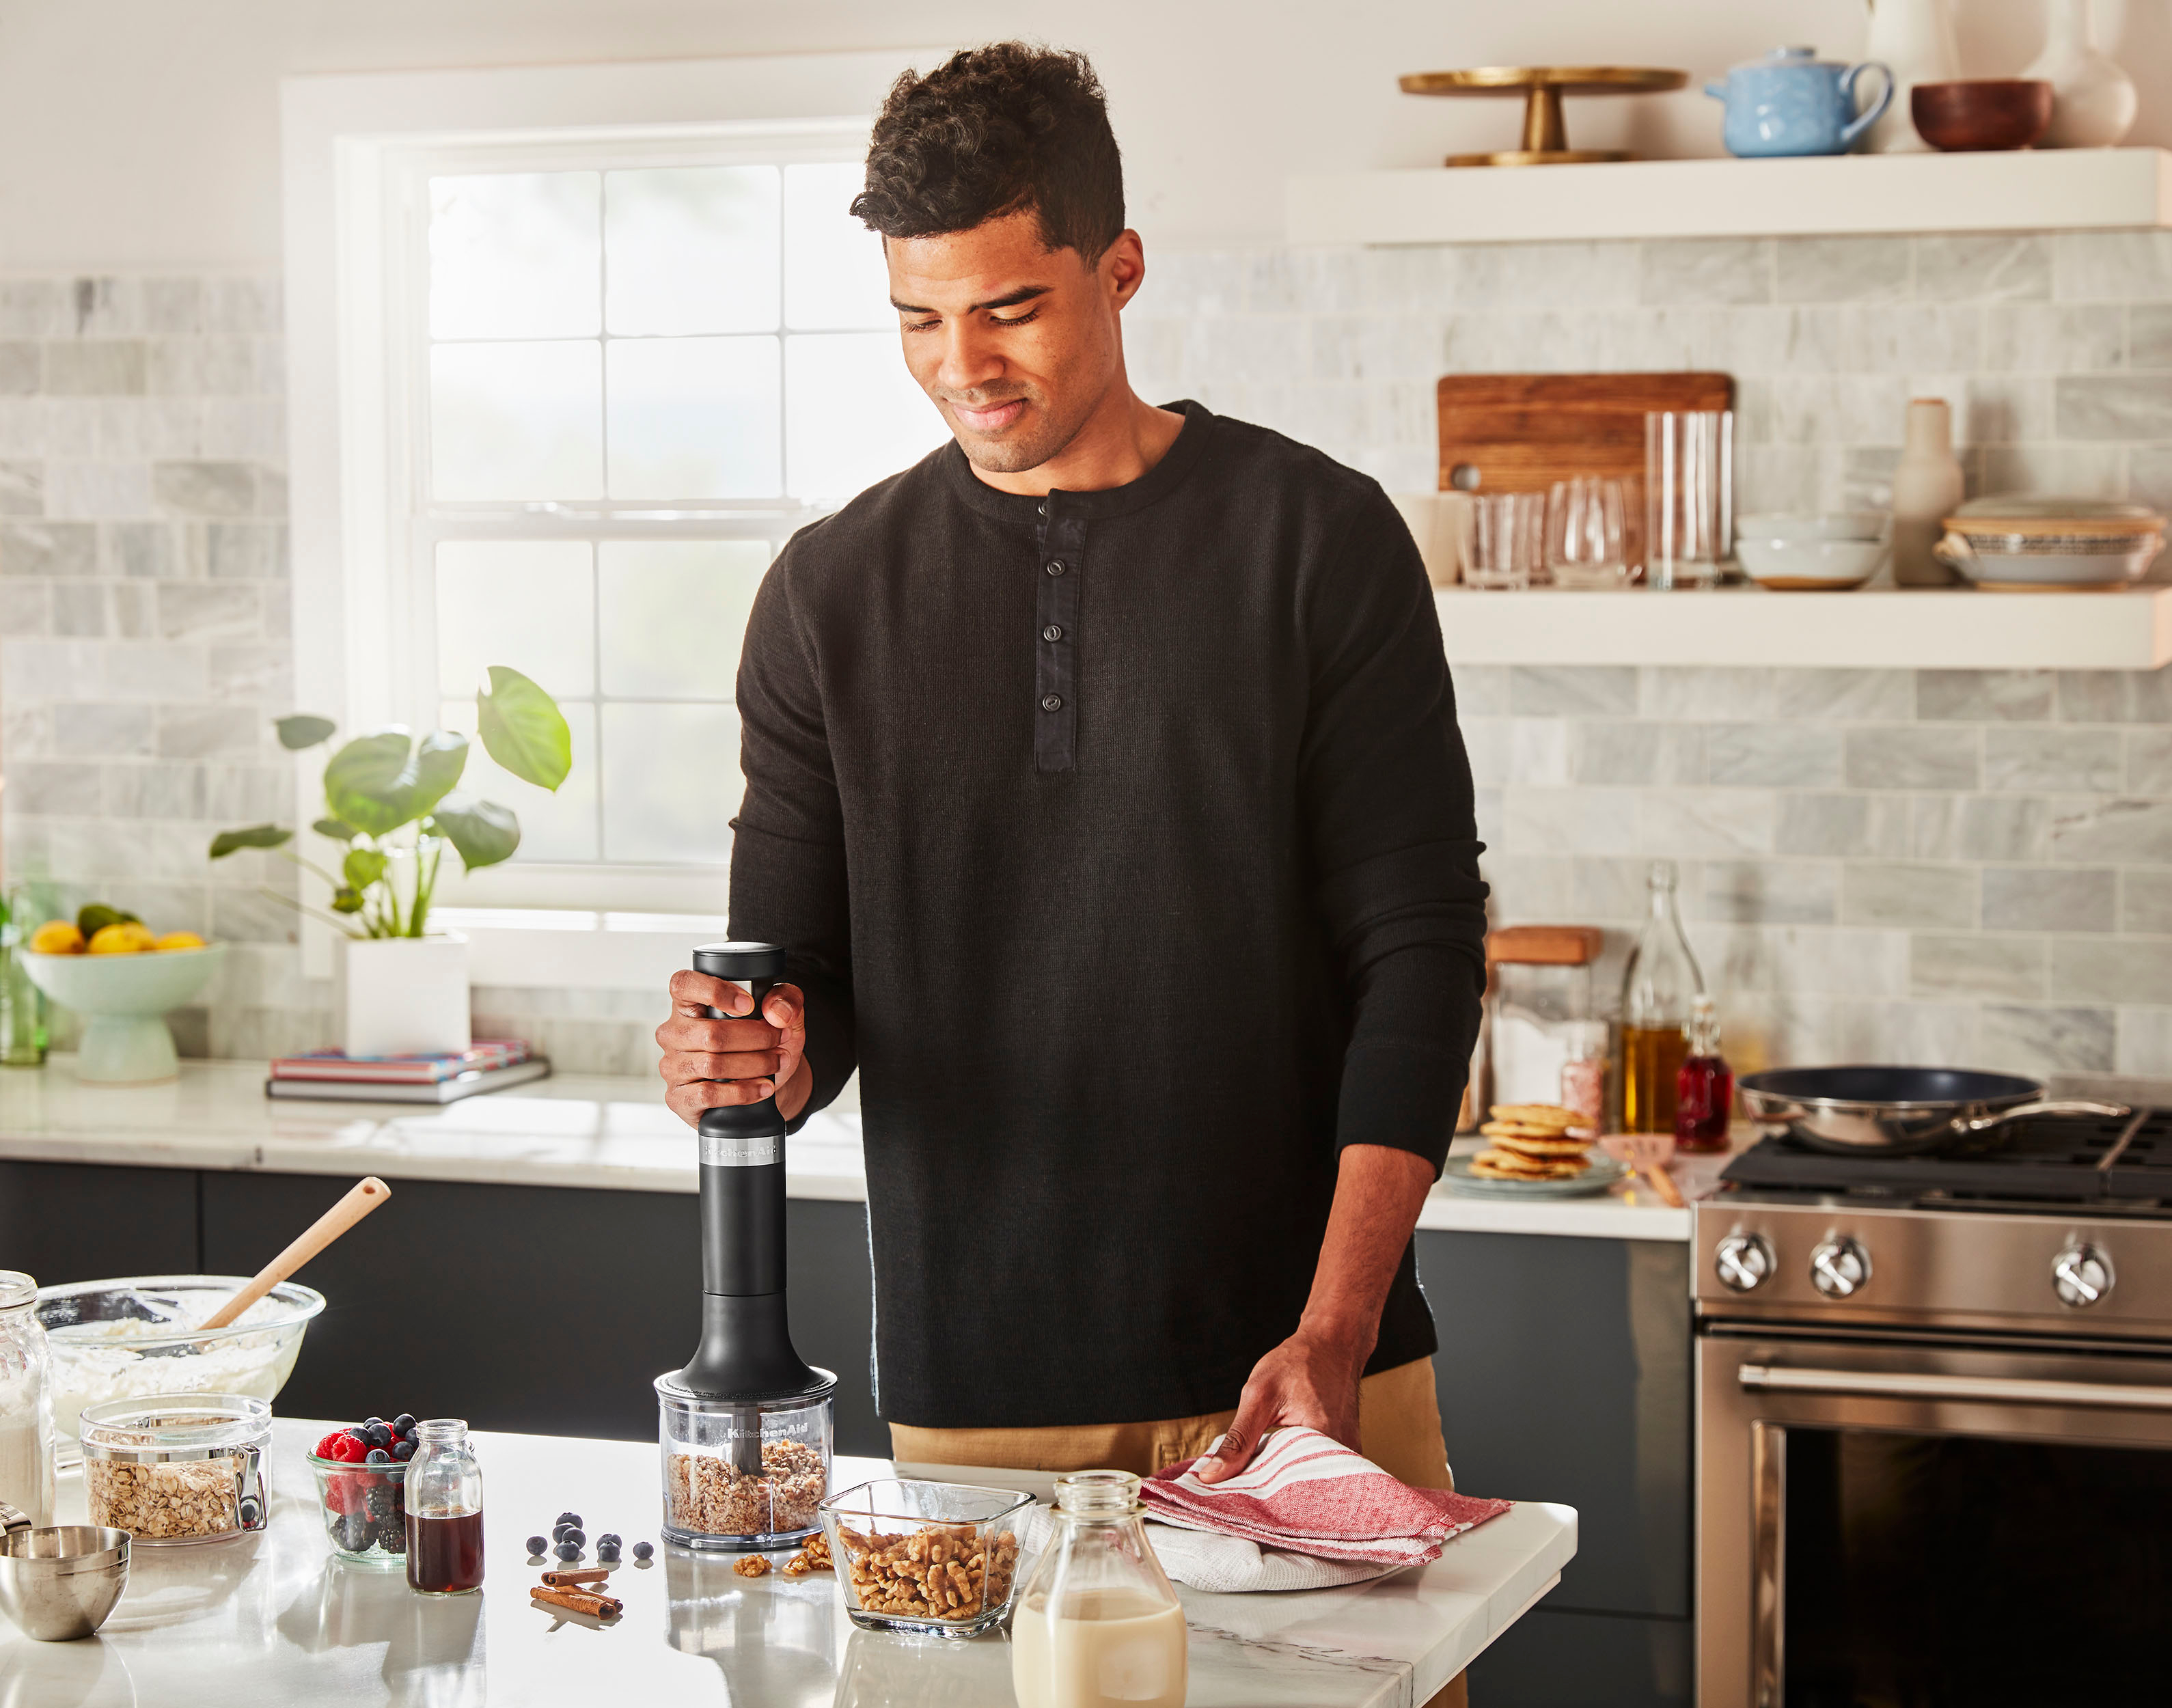 Kitchen & Table by H-E-B Cordless Hand Blender & Attachments